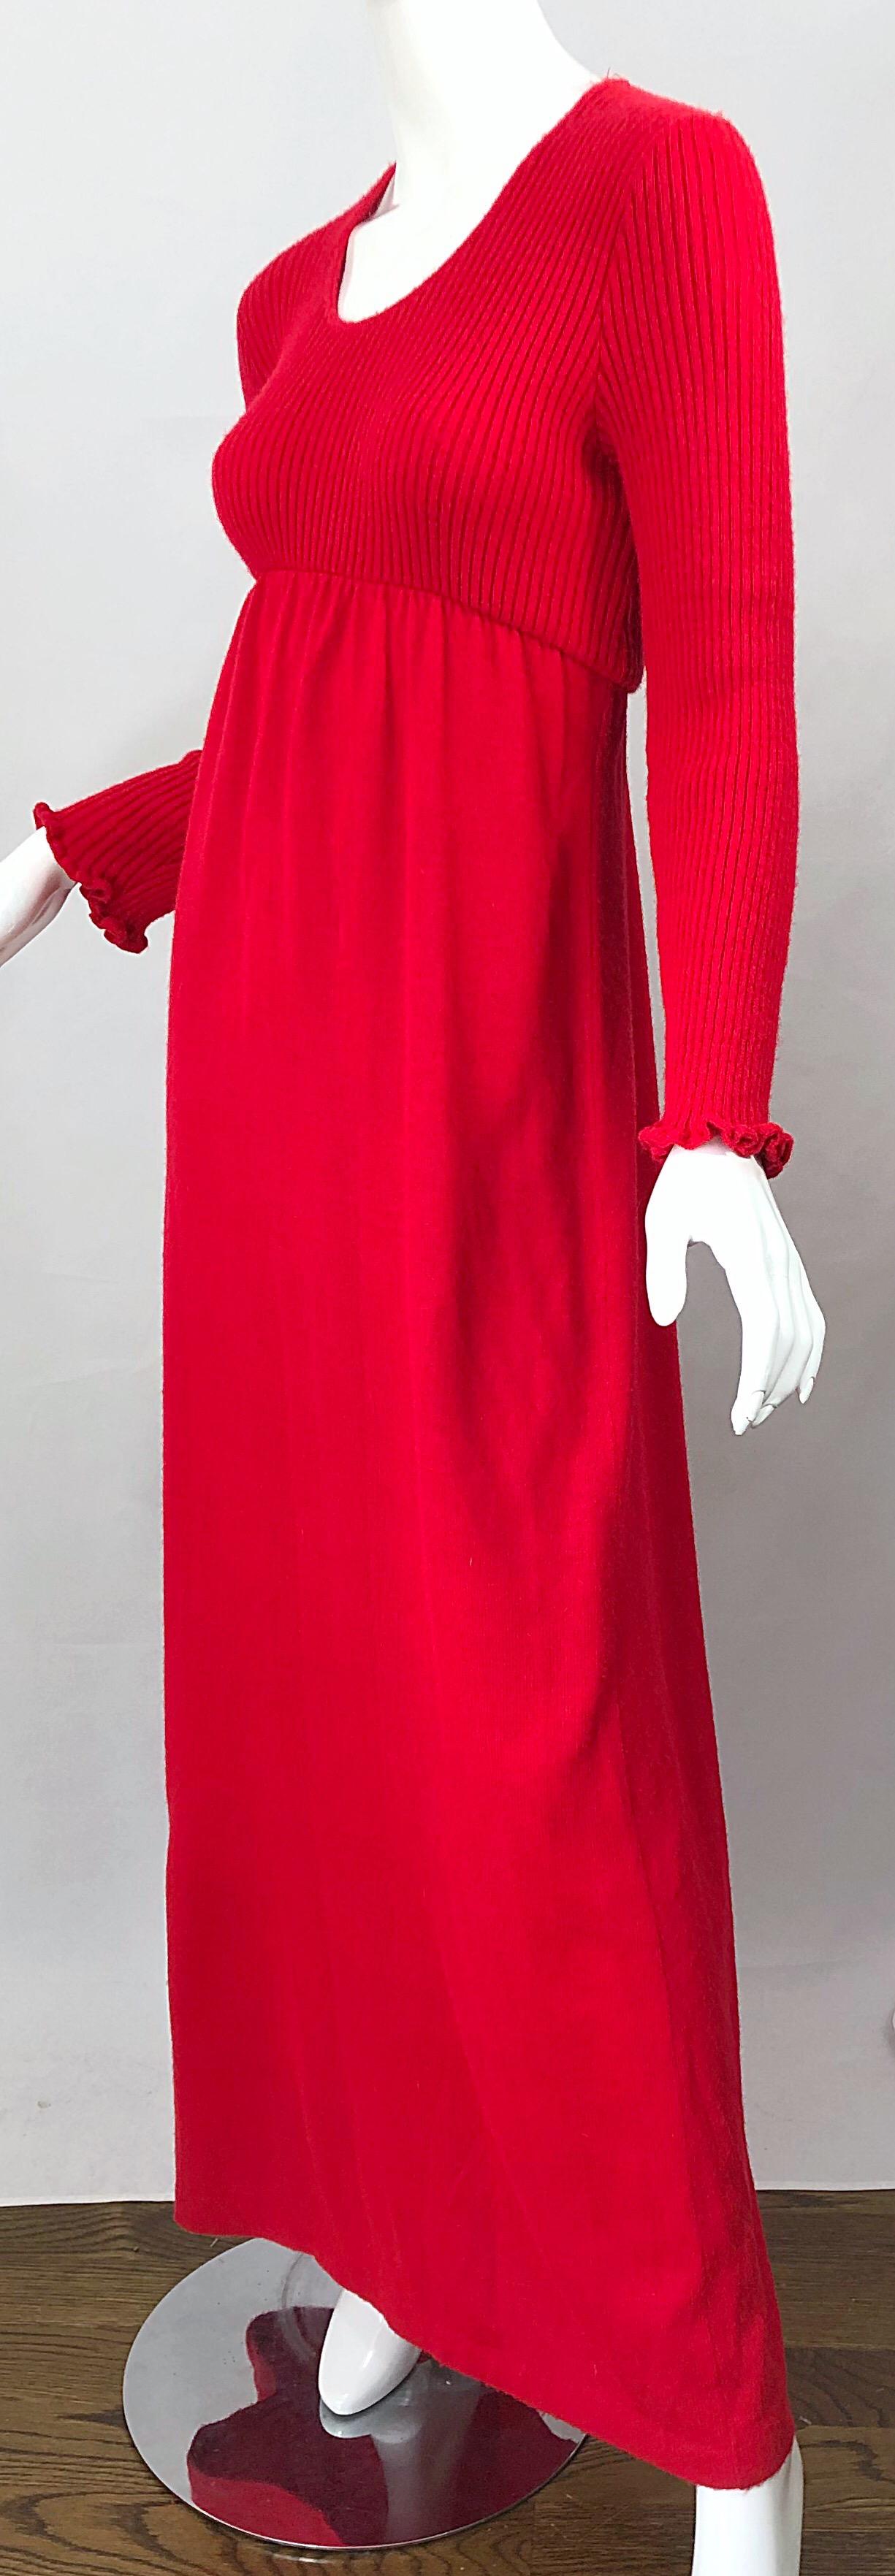 Vintage Joseph Magnin 1970s Lipstick Red Long Sleeve Wool 70s Sweater Maxi Dress For Sale 2